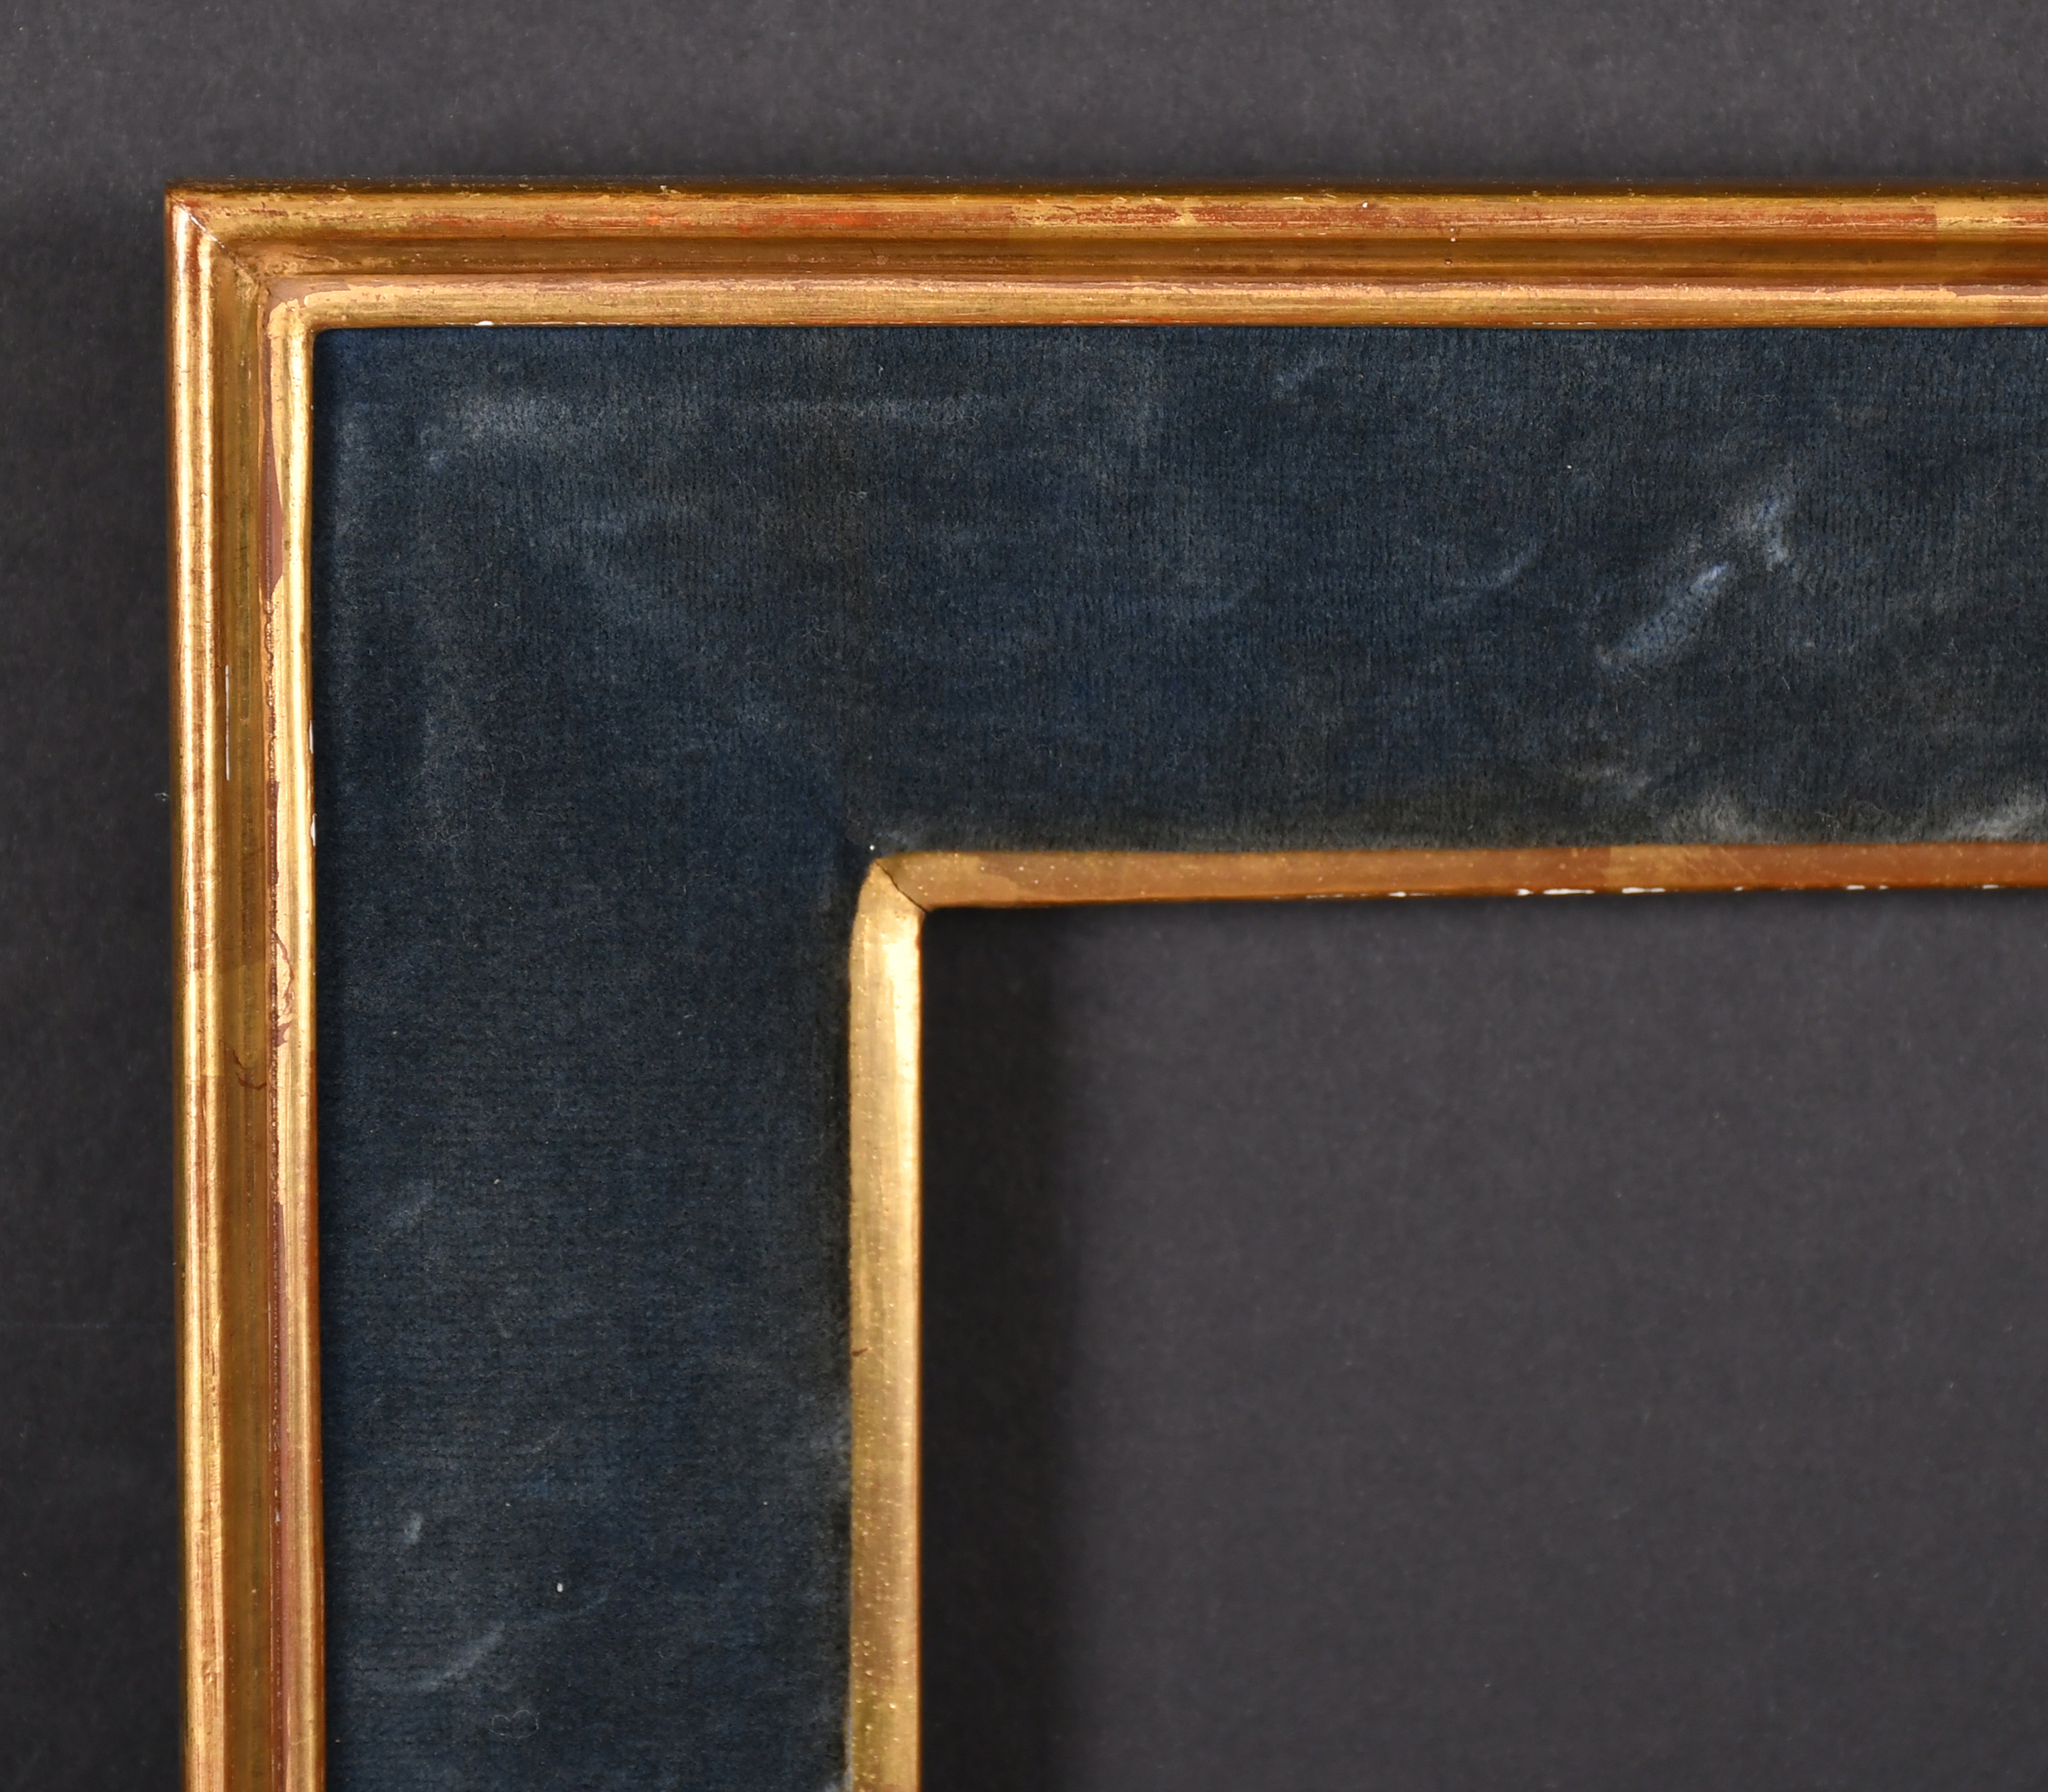 20th Century English School. A Gilt Frame, with a velvet panelling, rebate 9.5" x 7.5" (24.1 x 19cm)